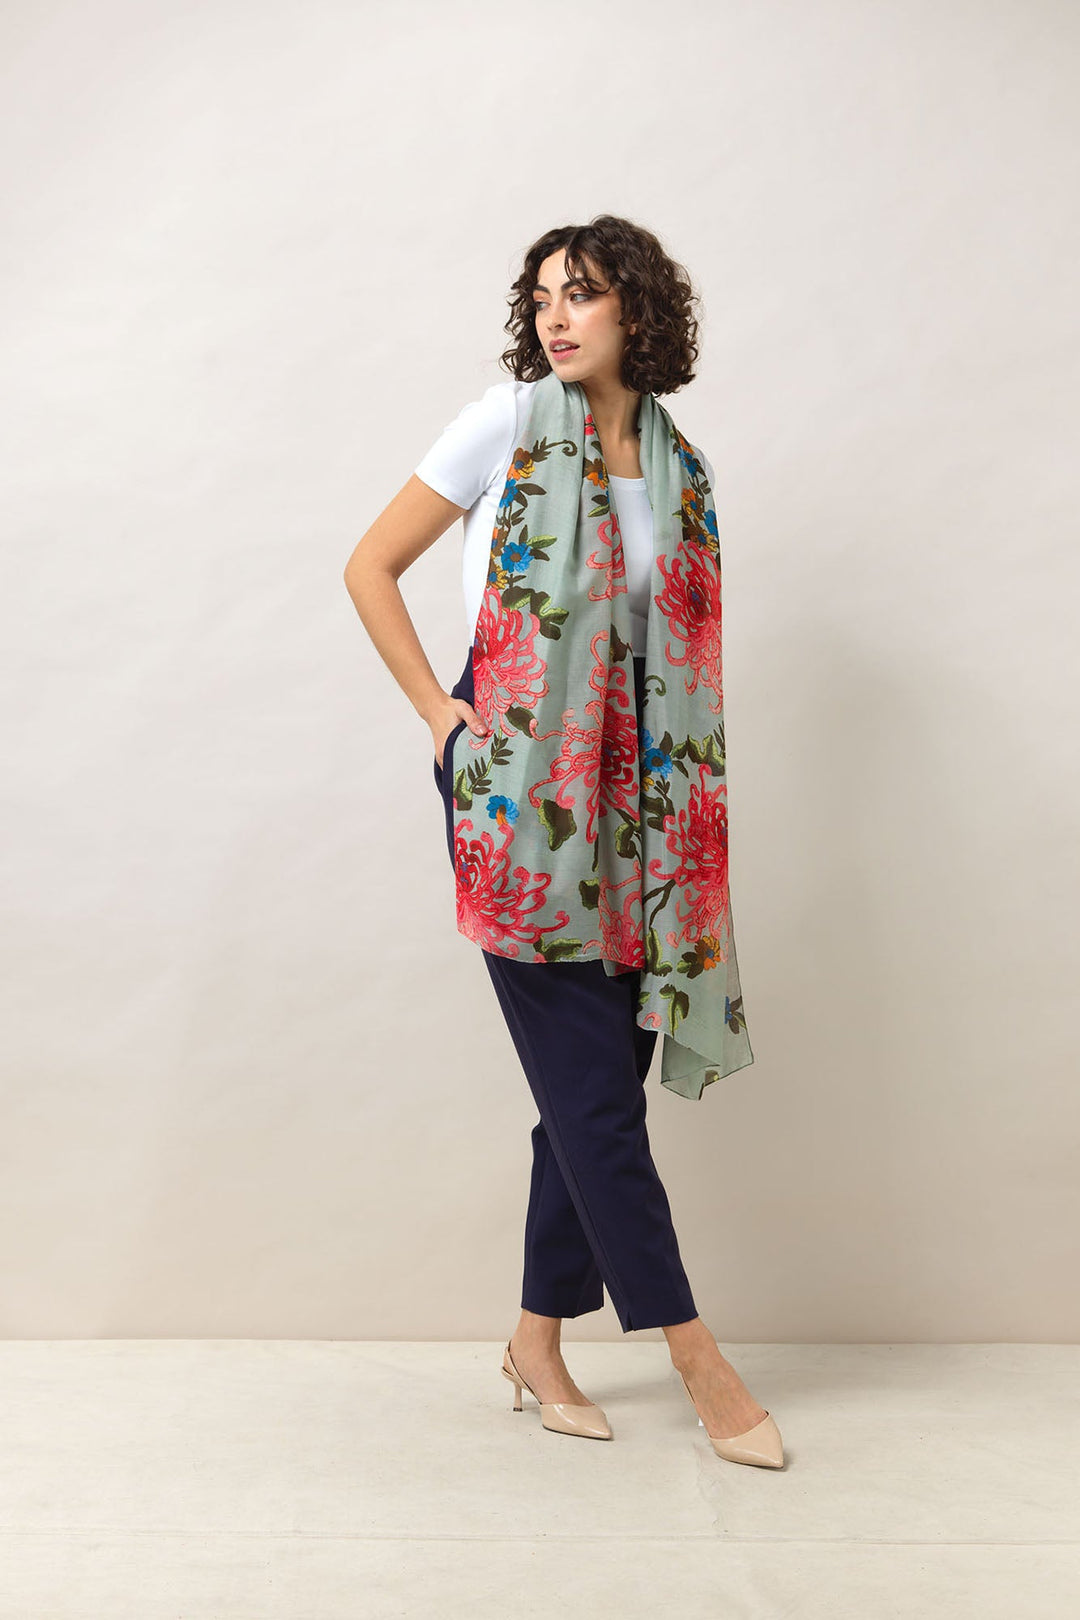 Women's accessories, large scarf in aqua with chrysanthemum print by One Hundred Stars